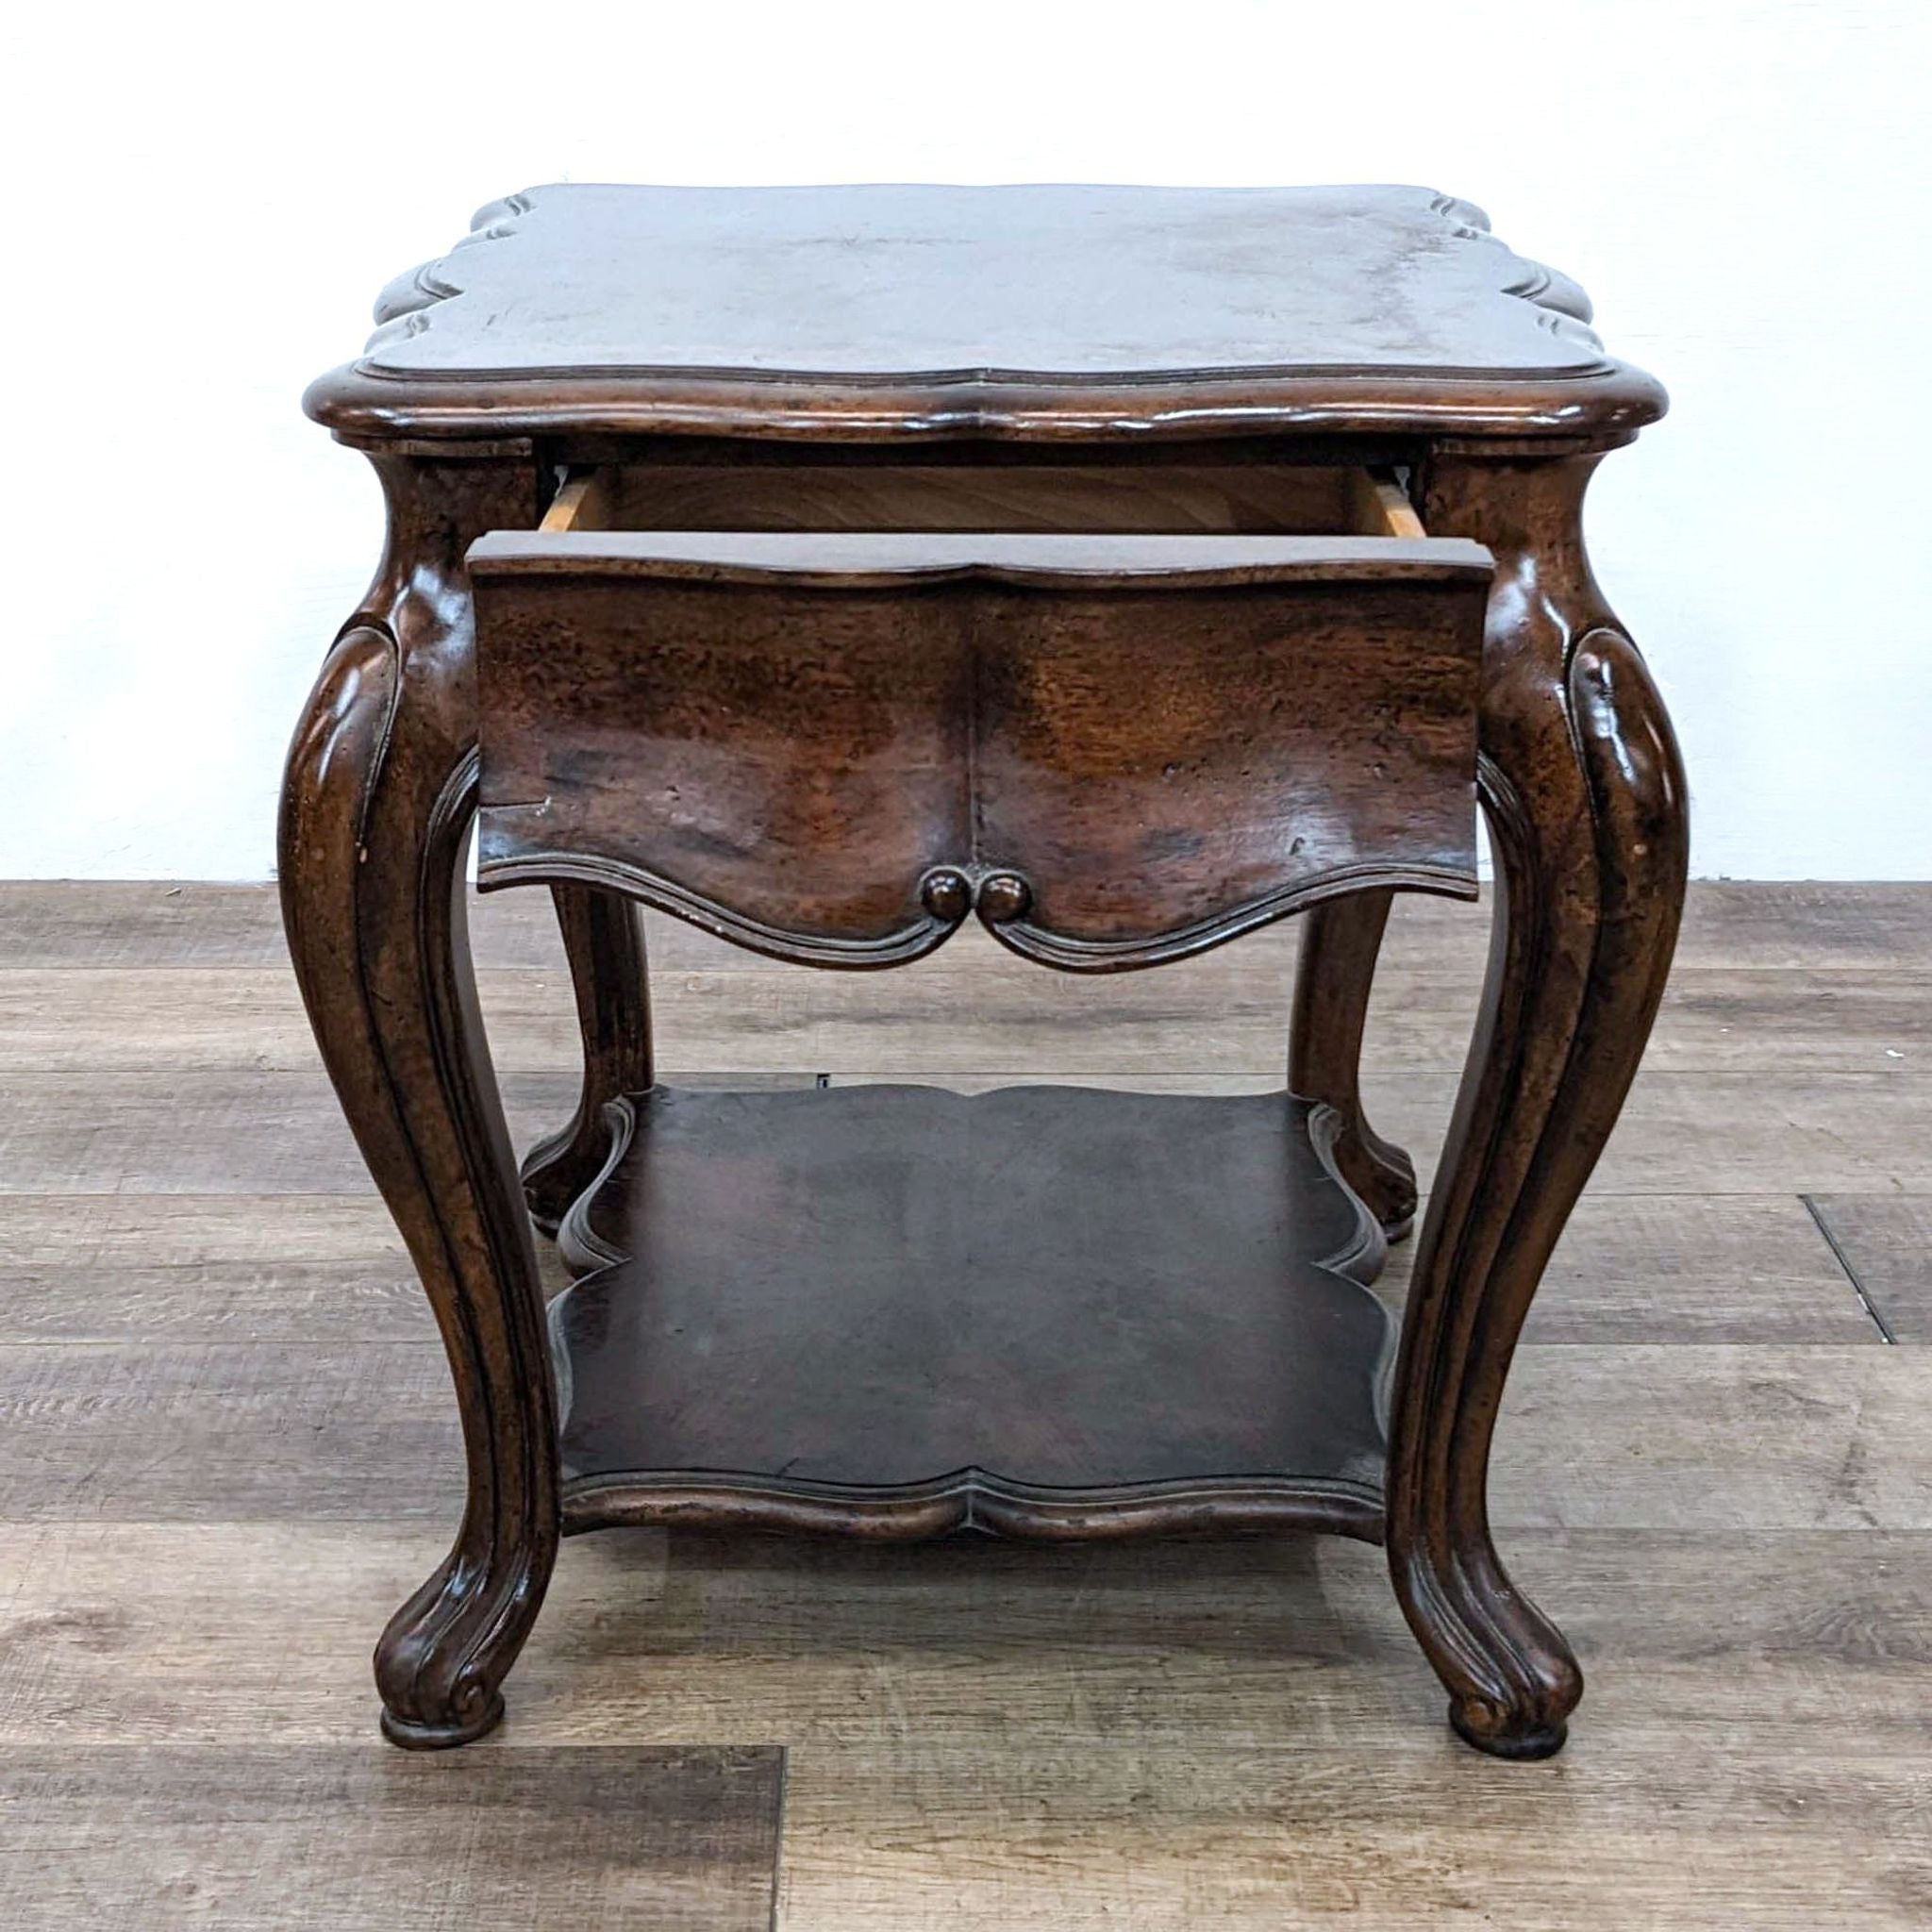 Alt text 1: Thomasville serpentine end table with inlaid top, curvy cabriole legs, and lower shelf, on wooden floor.